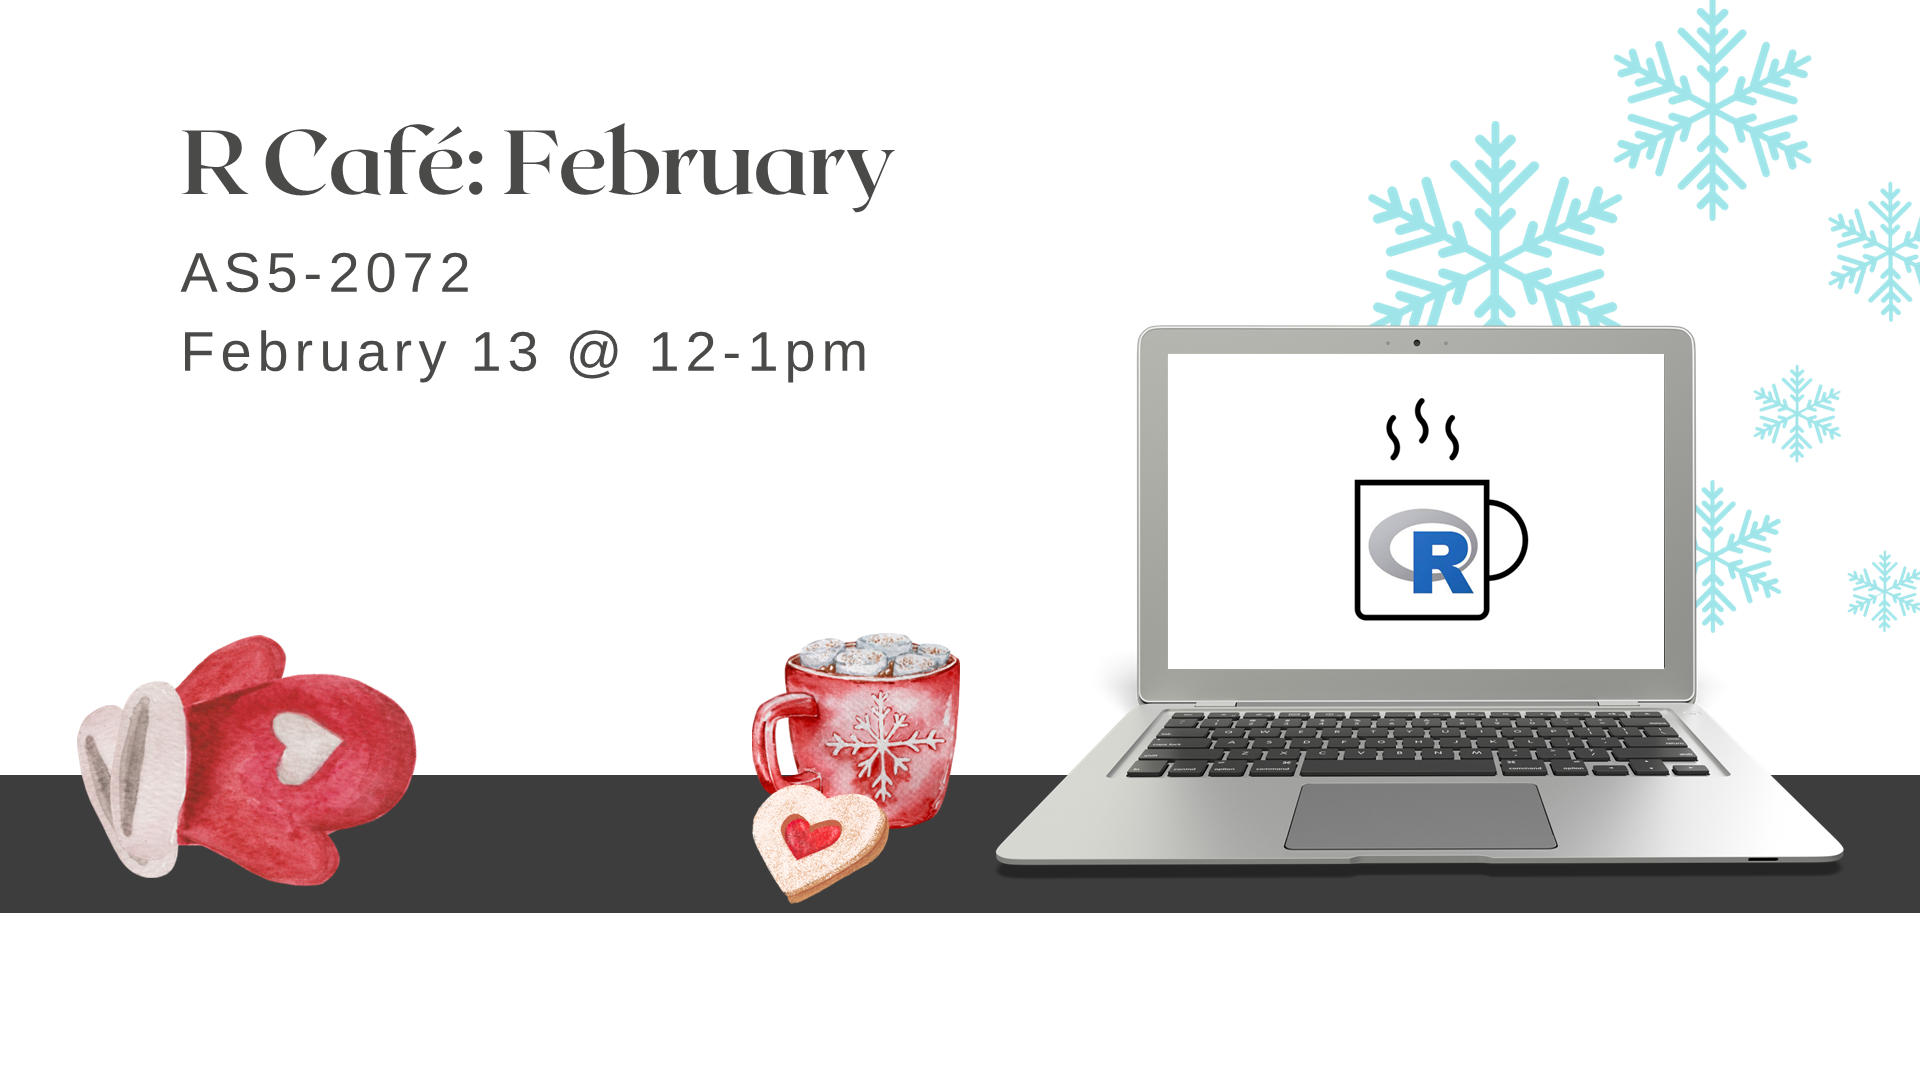 laptop with R Café logo, next to a mug of hot chocolate, mittens, a heart-shaped cookie, and a background of snowflakes with text: R Café February AS5-2072, February 13 at 12 to 1 pm